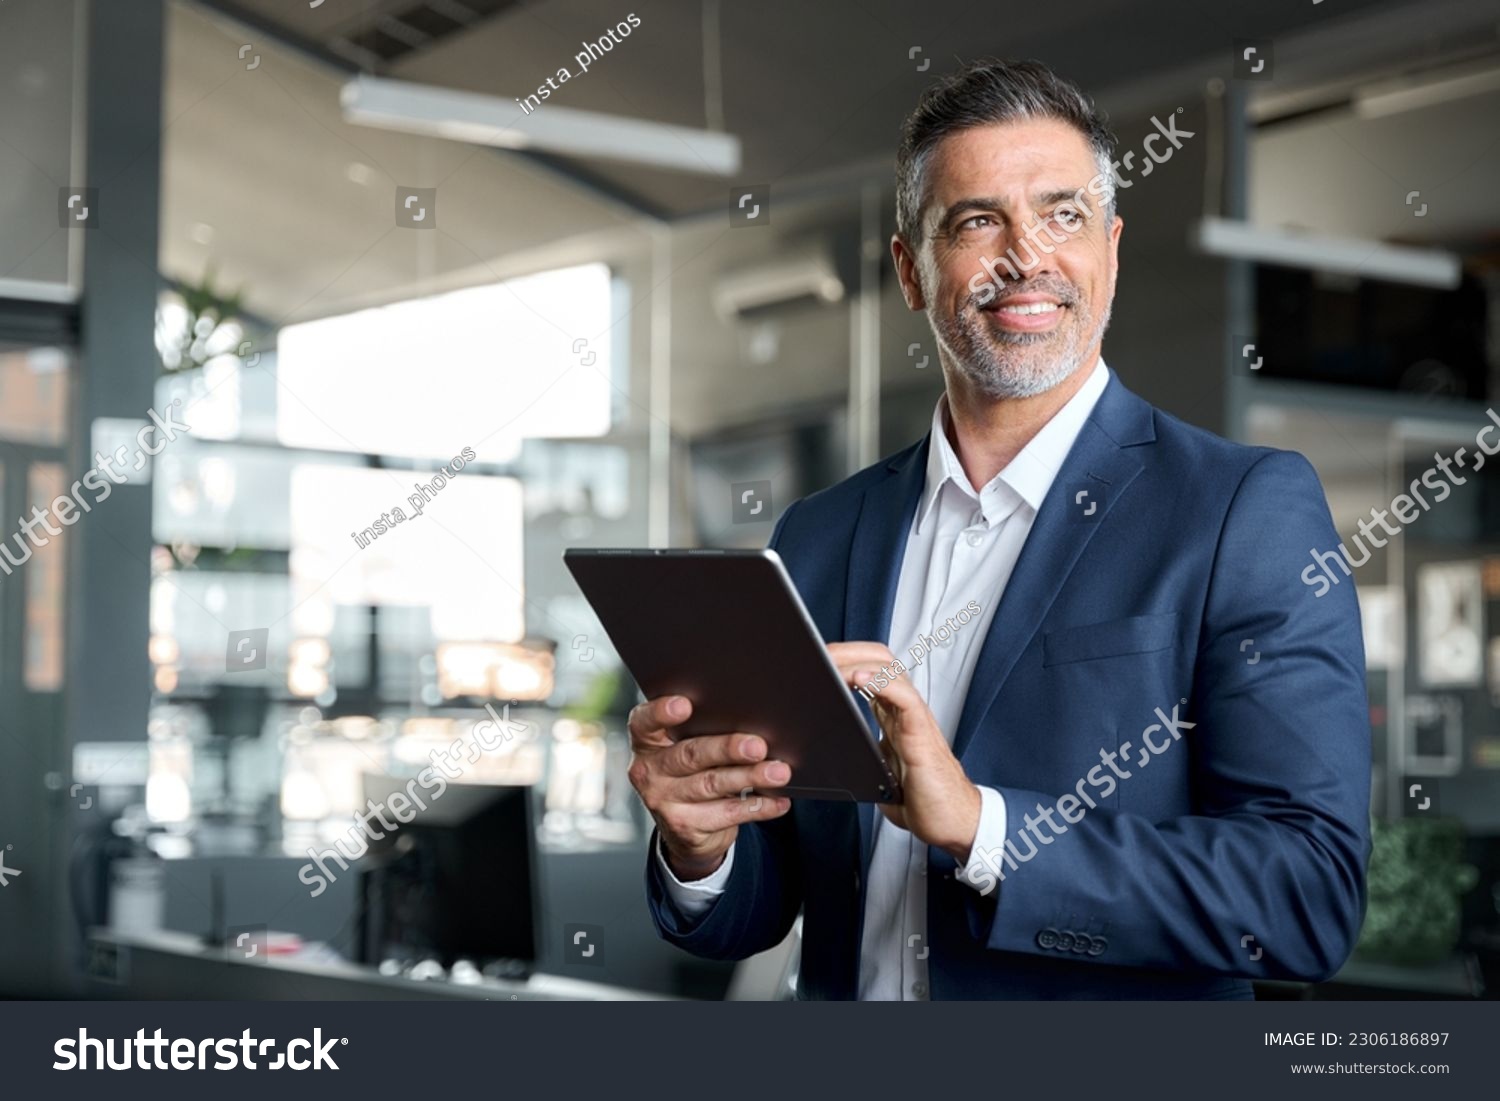 Happy middle aged business man ceo wearing suit standing in office using digital tablet. Smiling mature businessman professional executive manager looking away thinking working on tech device. #2306186897